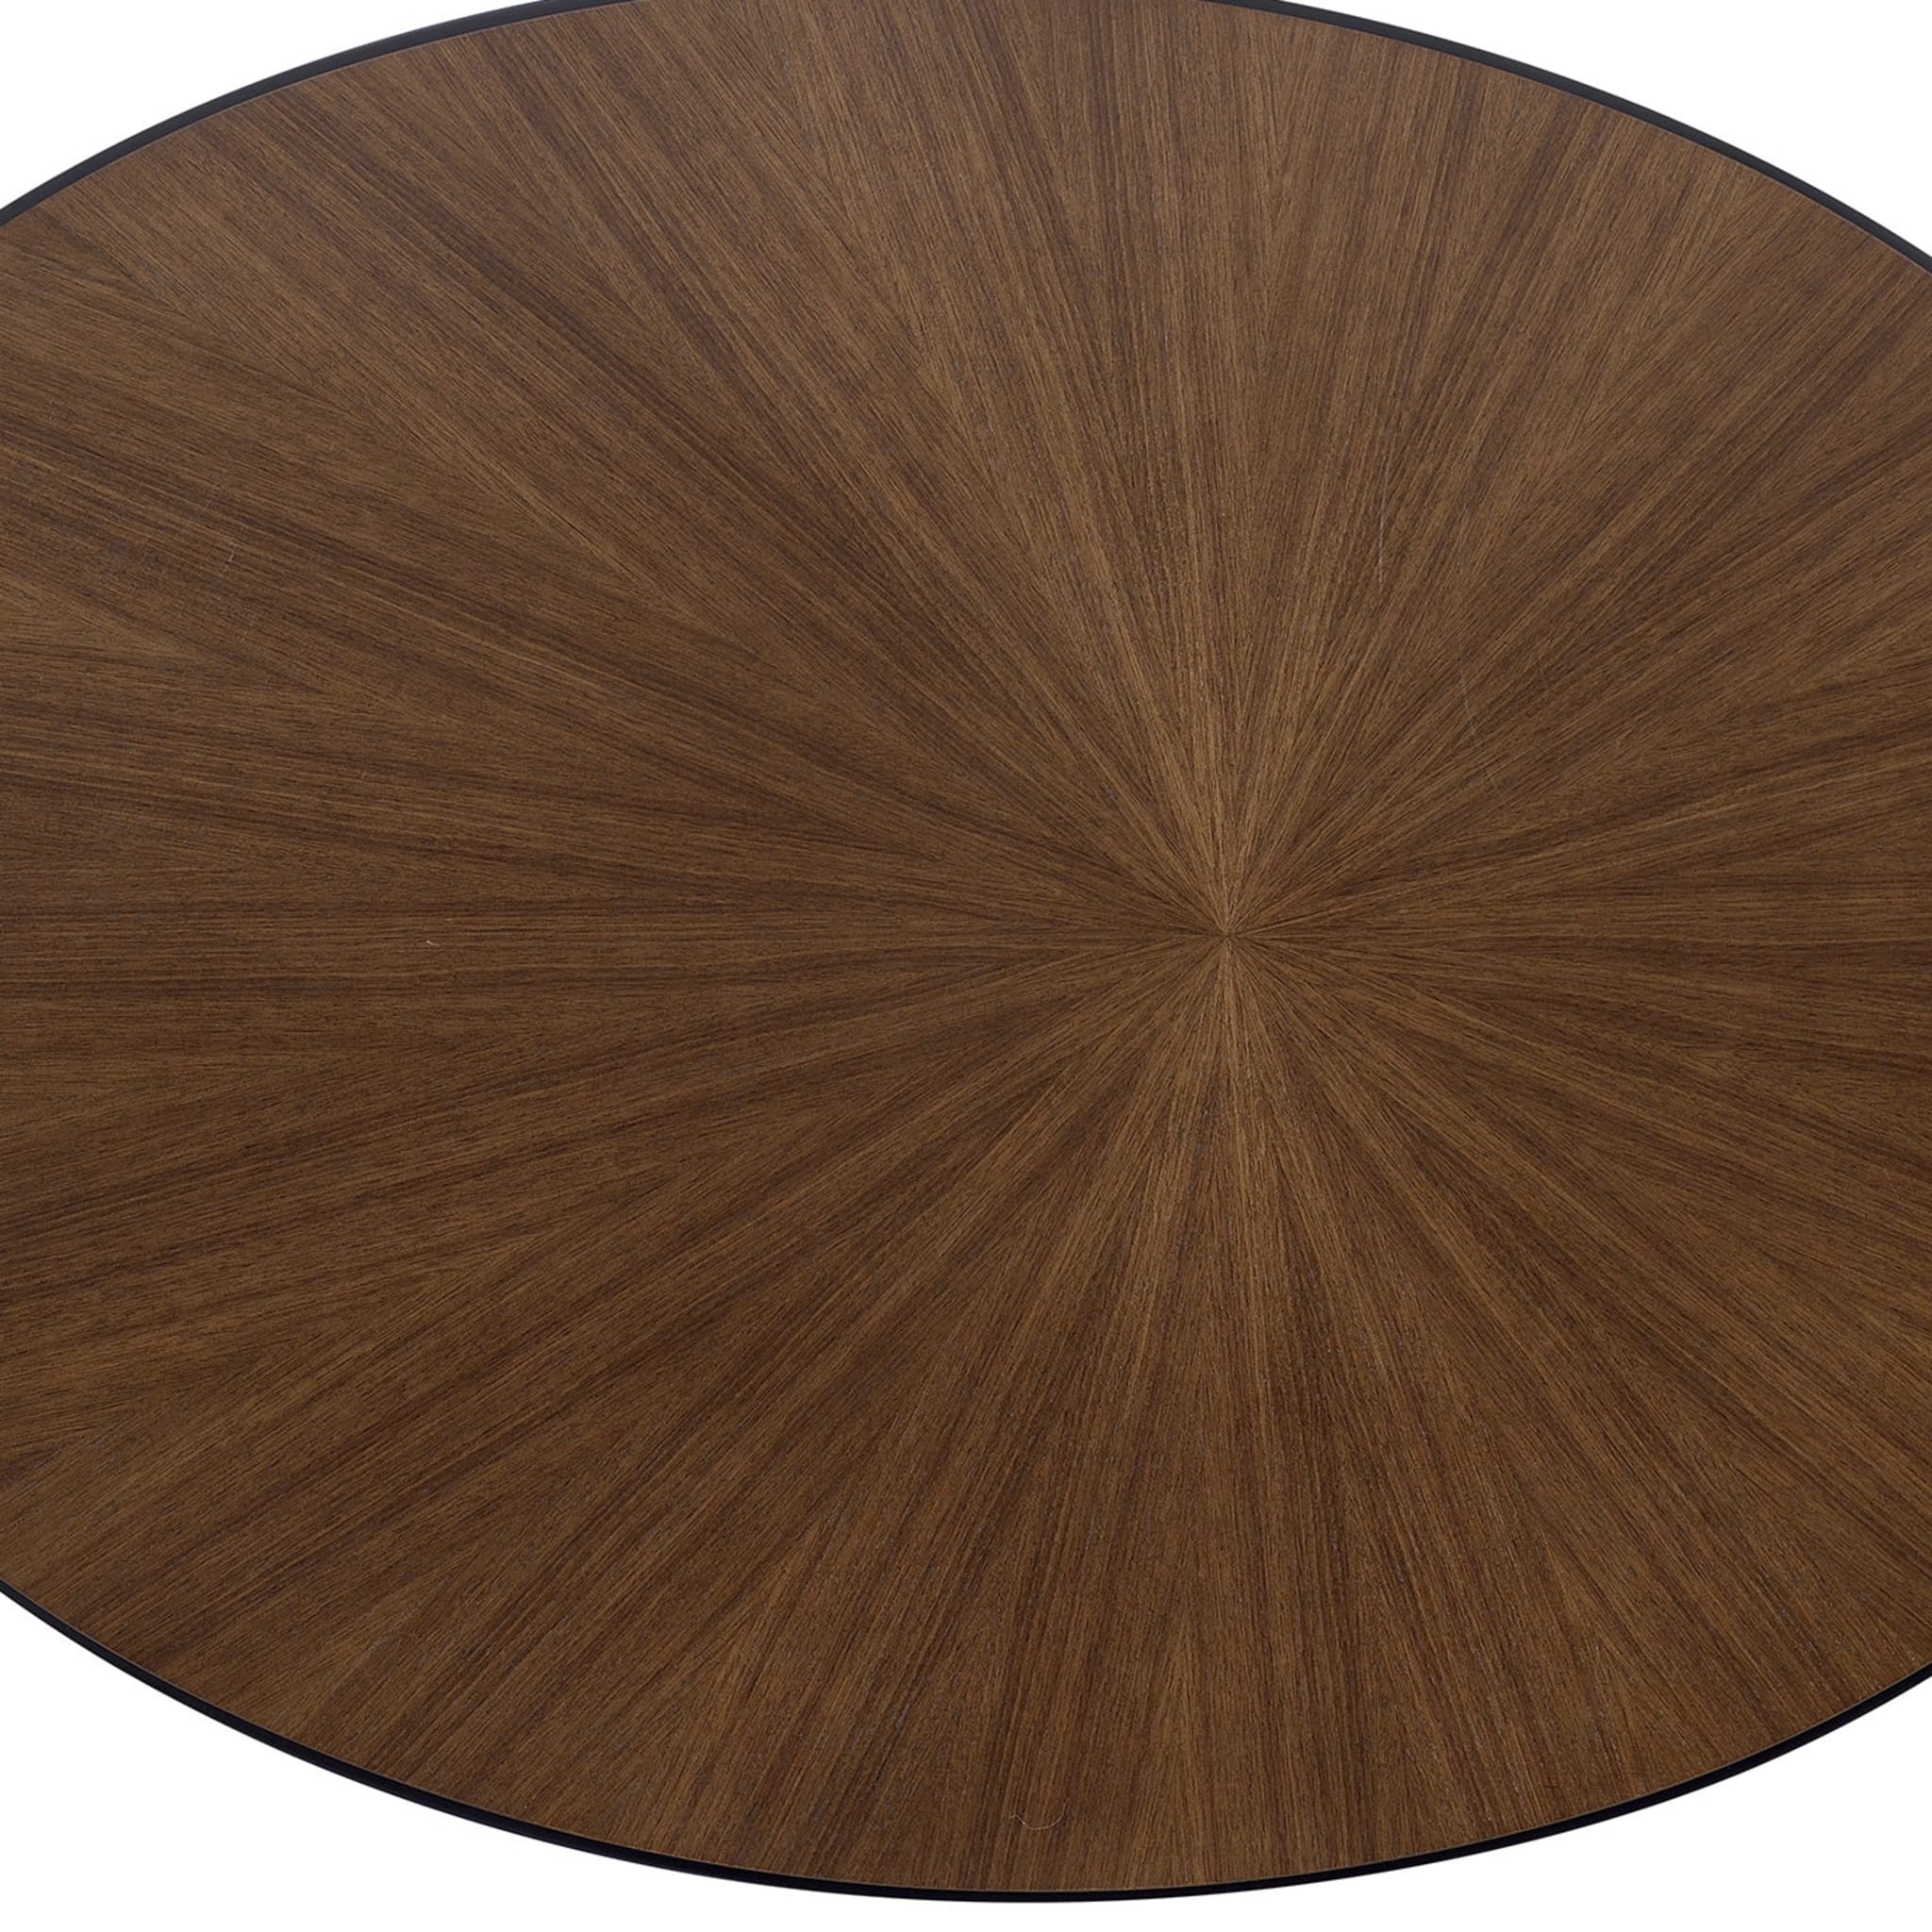 Tall Oval Coffee Table - Alternative view 1